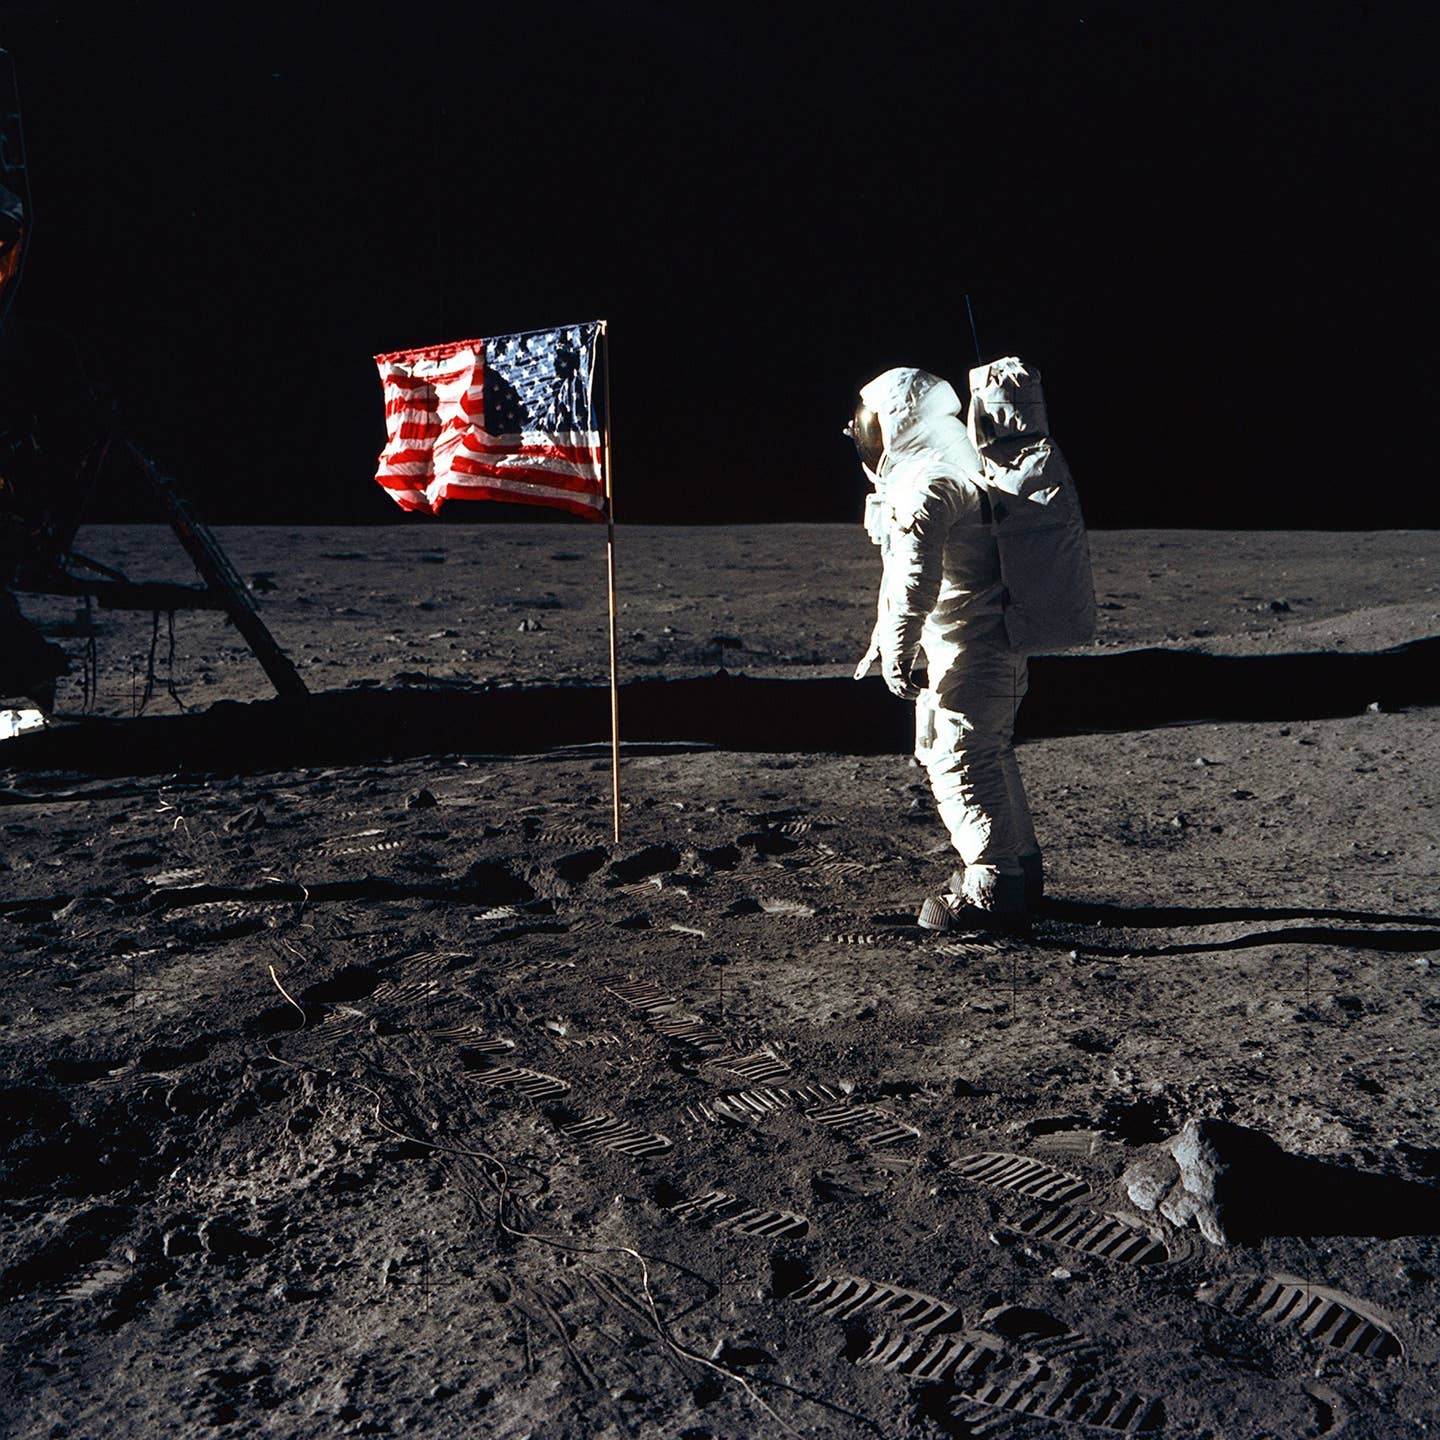 Astronaut Buzz Aldrin, the lunar module pilot of the first lunar landing mission, poses for a photograph beside the deployed United States flag during an Apollo 11 Extravehicular Activity (EVA) on the lunar surface. <em>NASA/Wikimedia Commons</em>